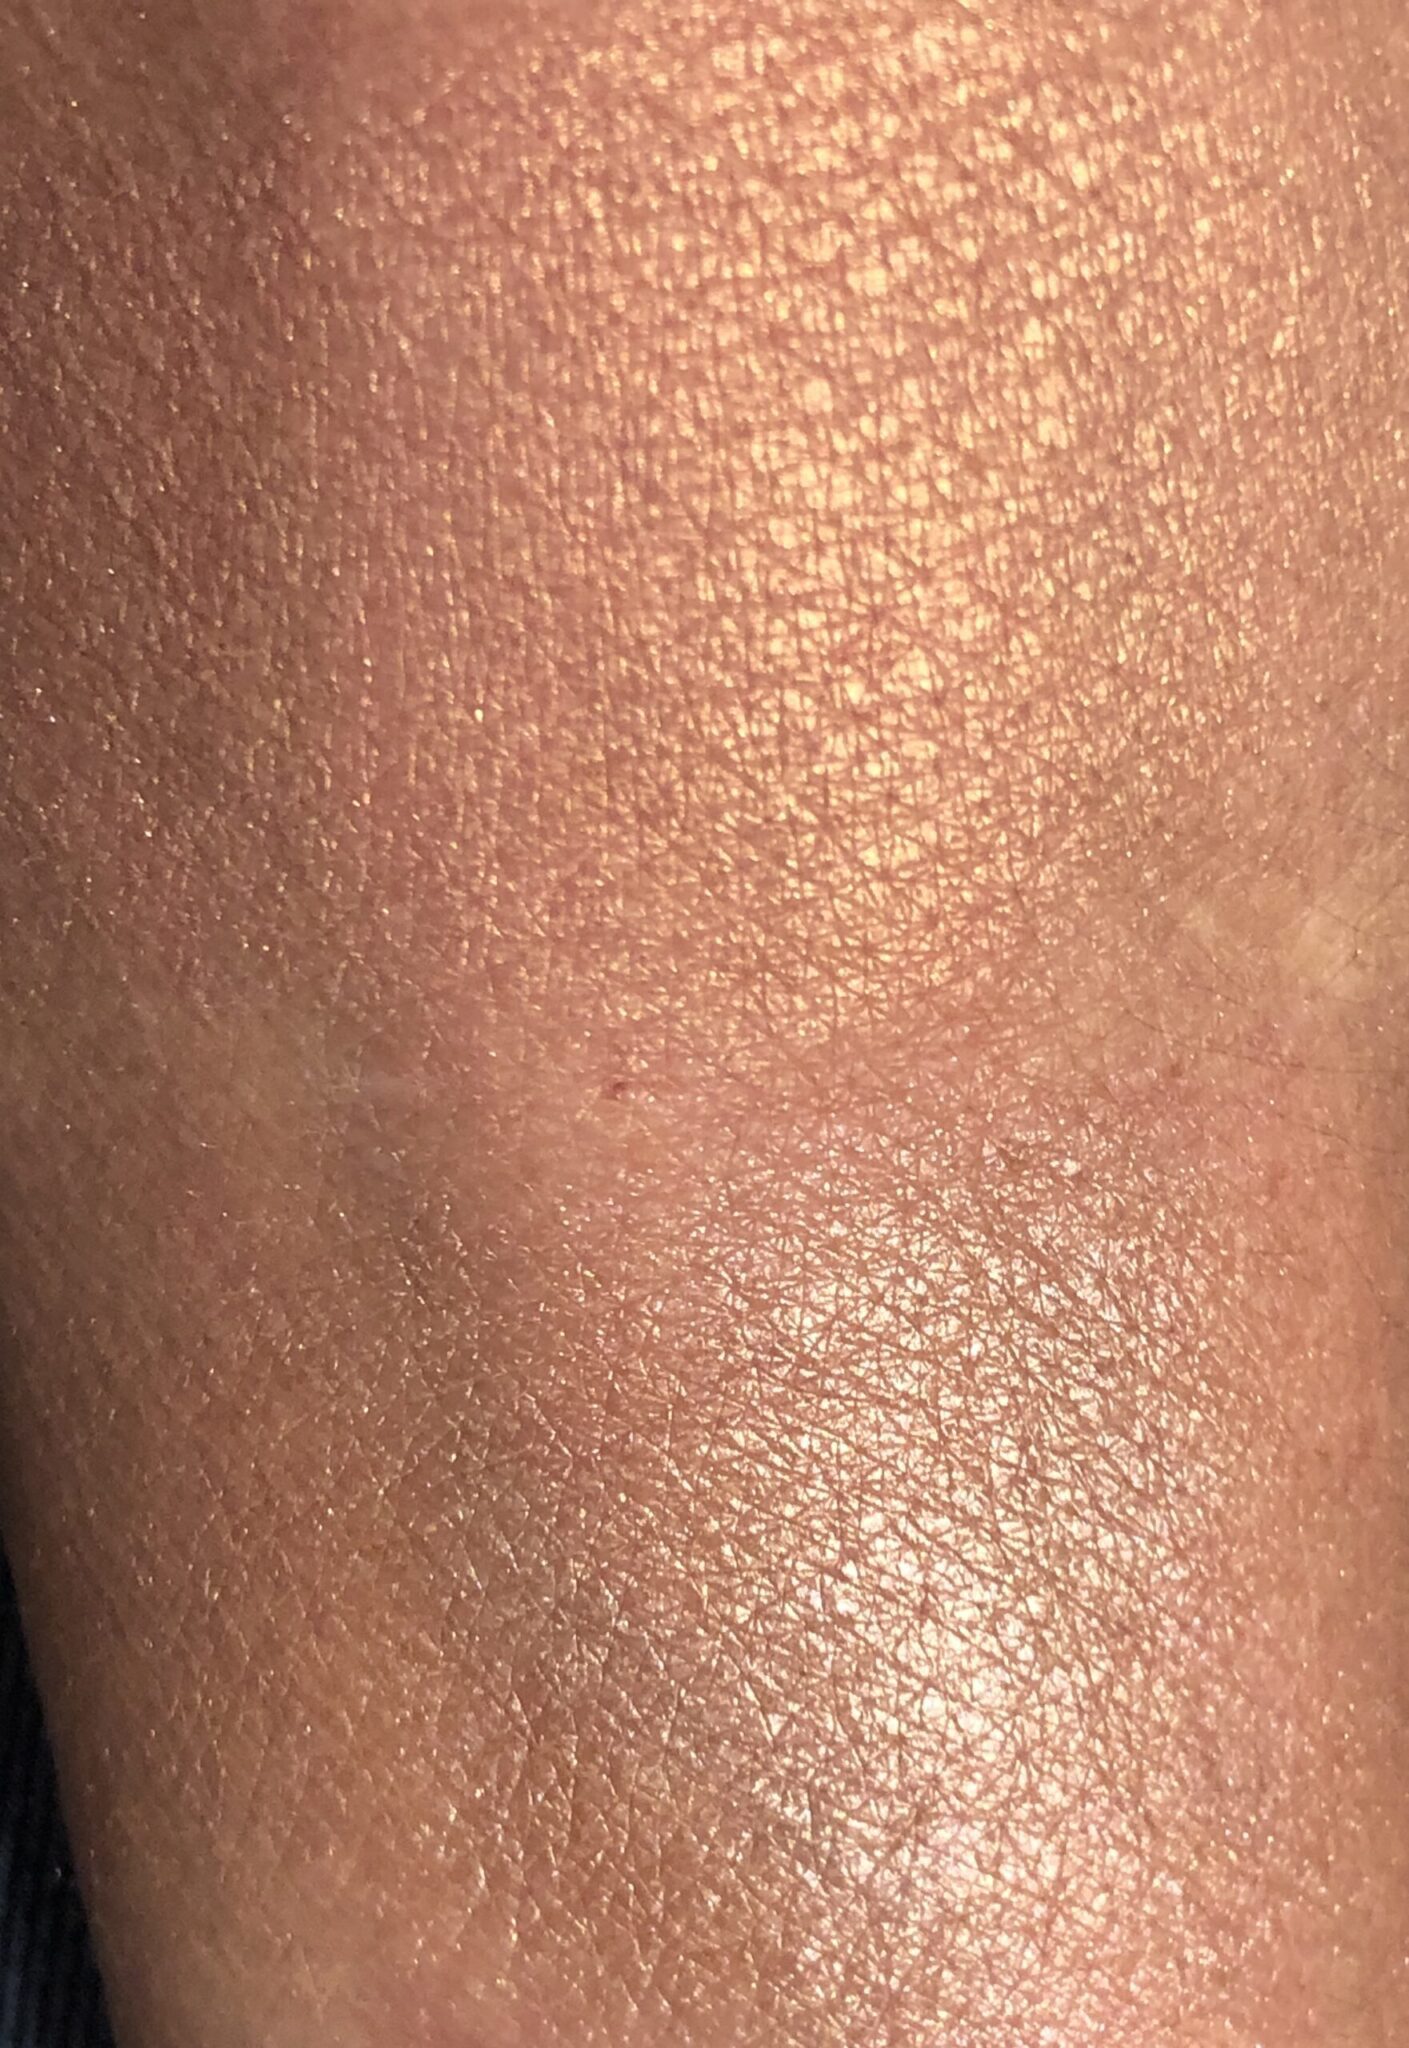 DIORSKIN NUDE LUMINIZER SHIMMERING GLOW POWDER SWATCHES TOP IS PEACH DUNE, BOTTOM IS ROSE GLOW